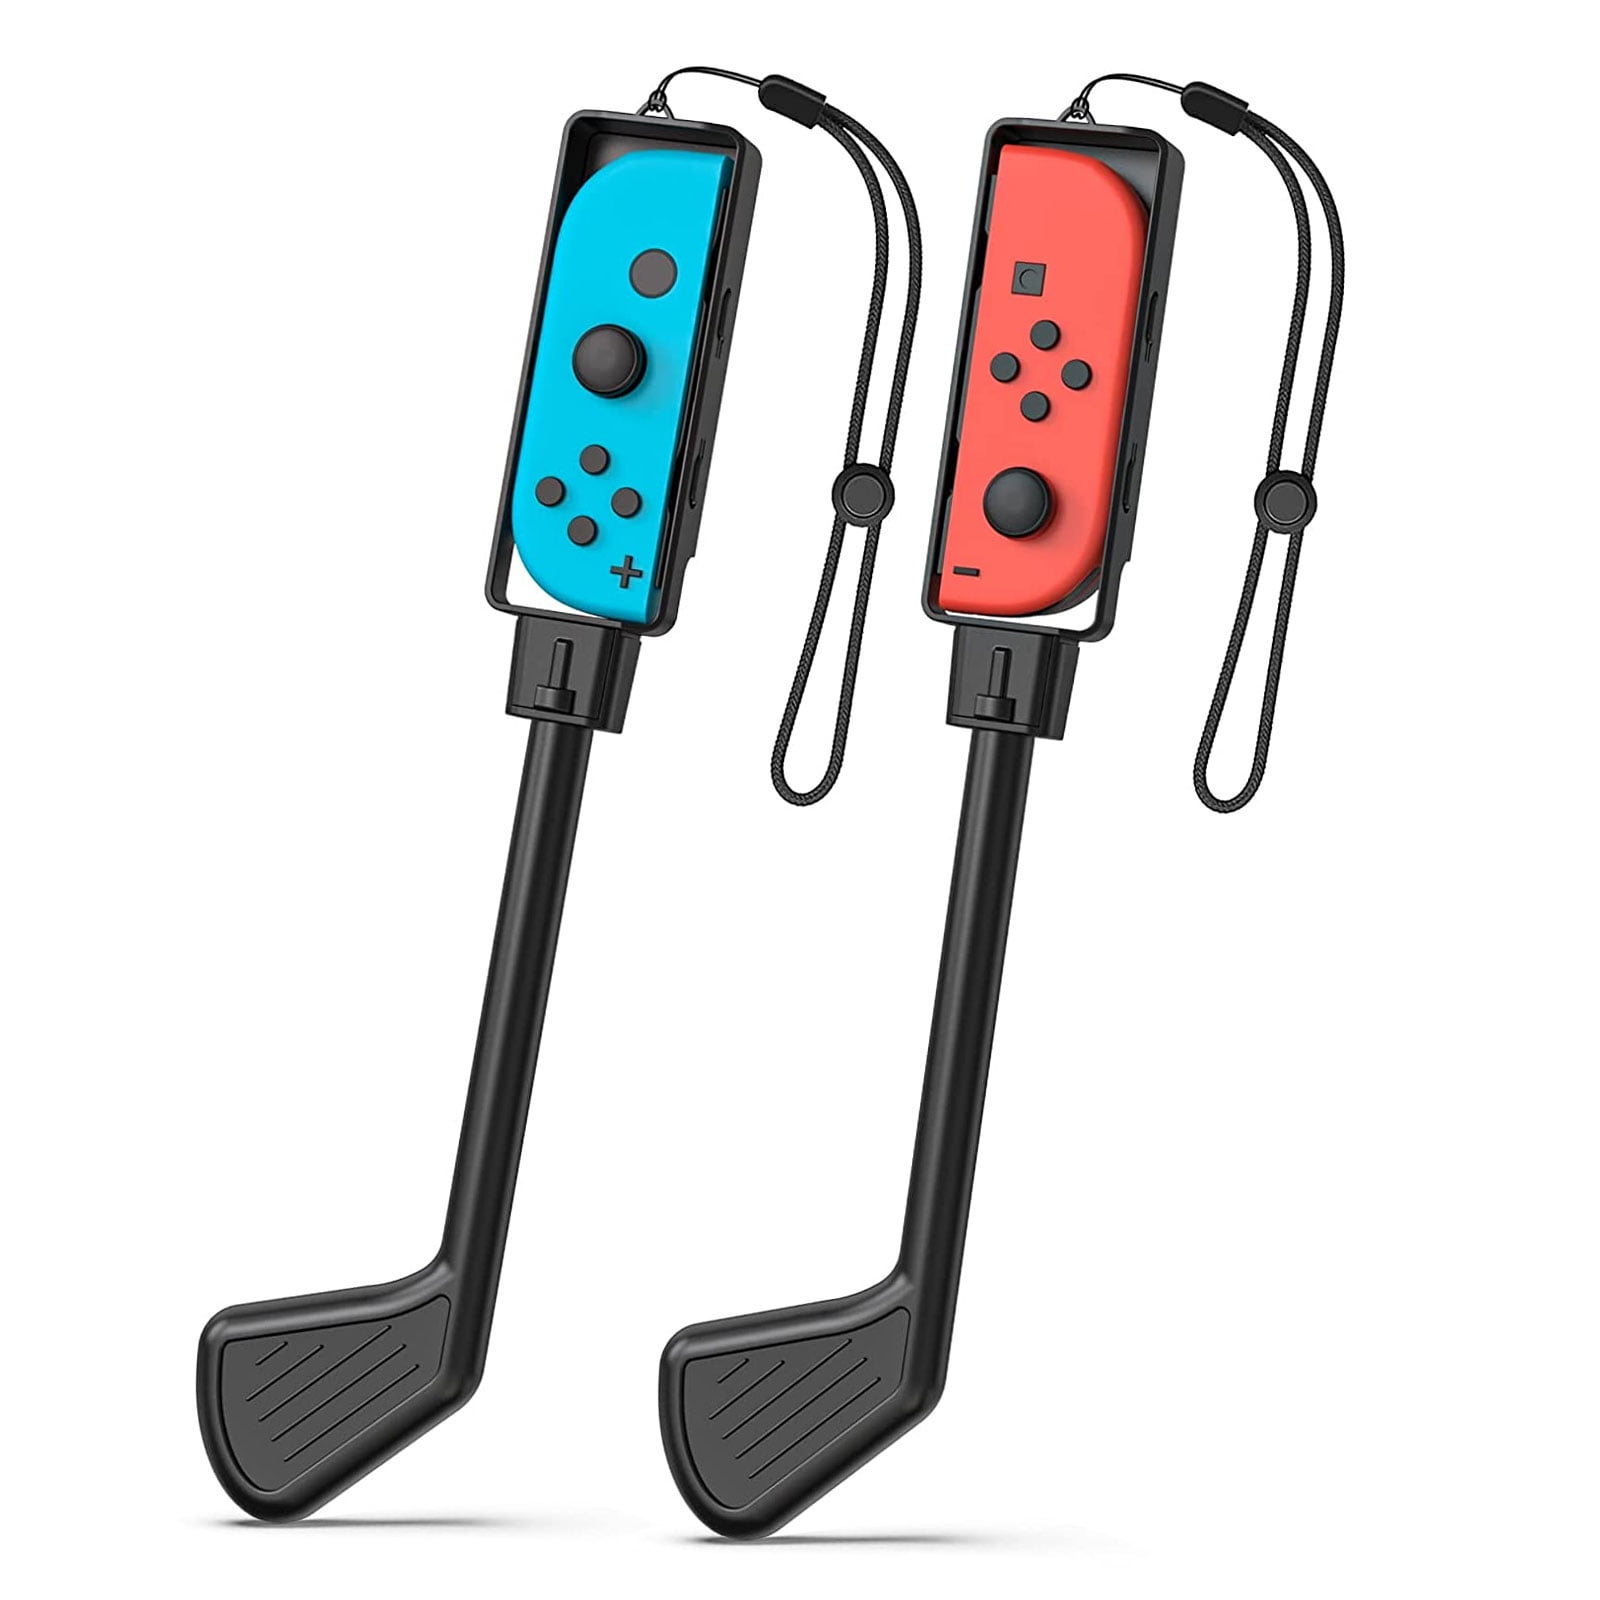 ABS Fishing Rod for Nintendo Switch Joy-con Controller Fishing Game Gamer